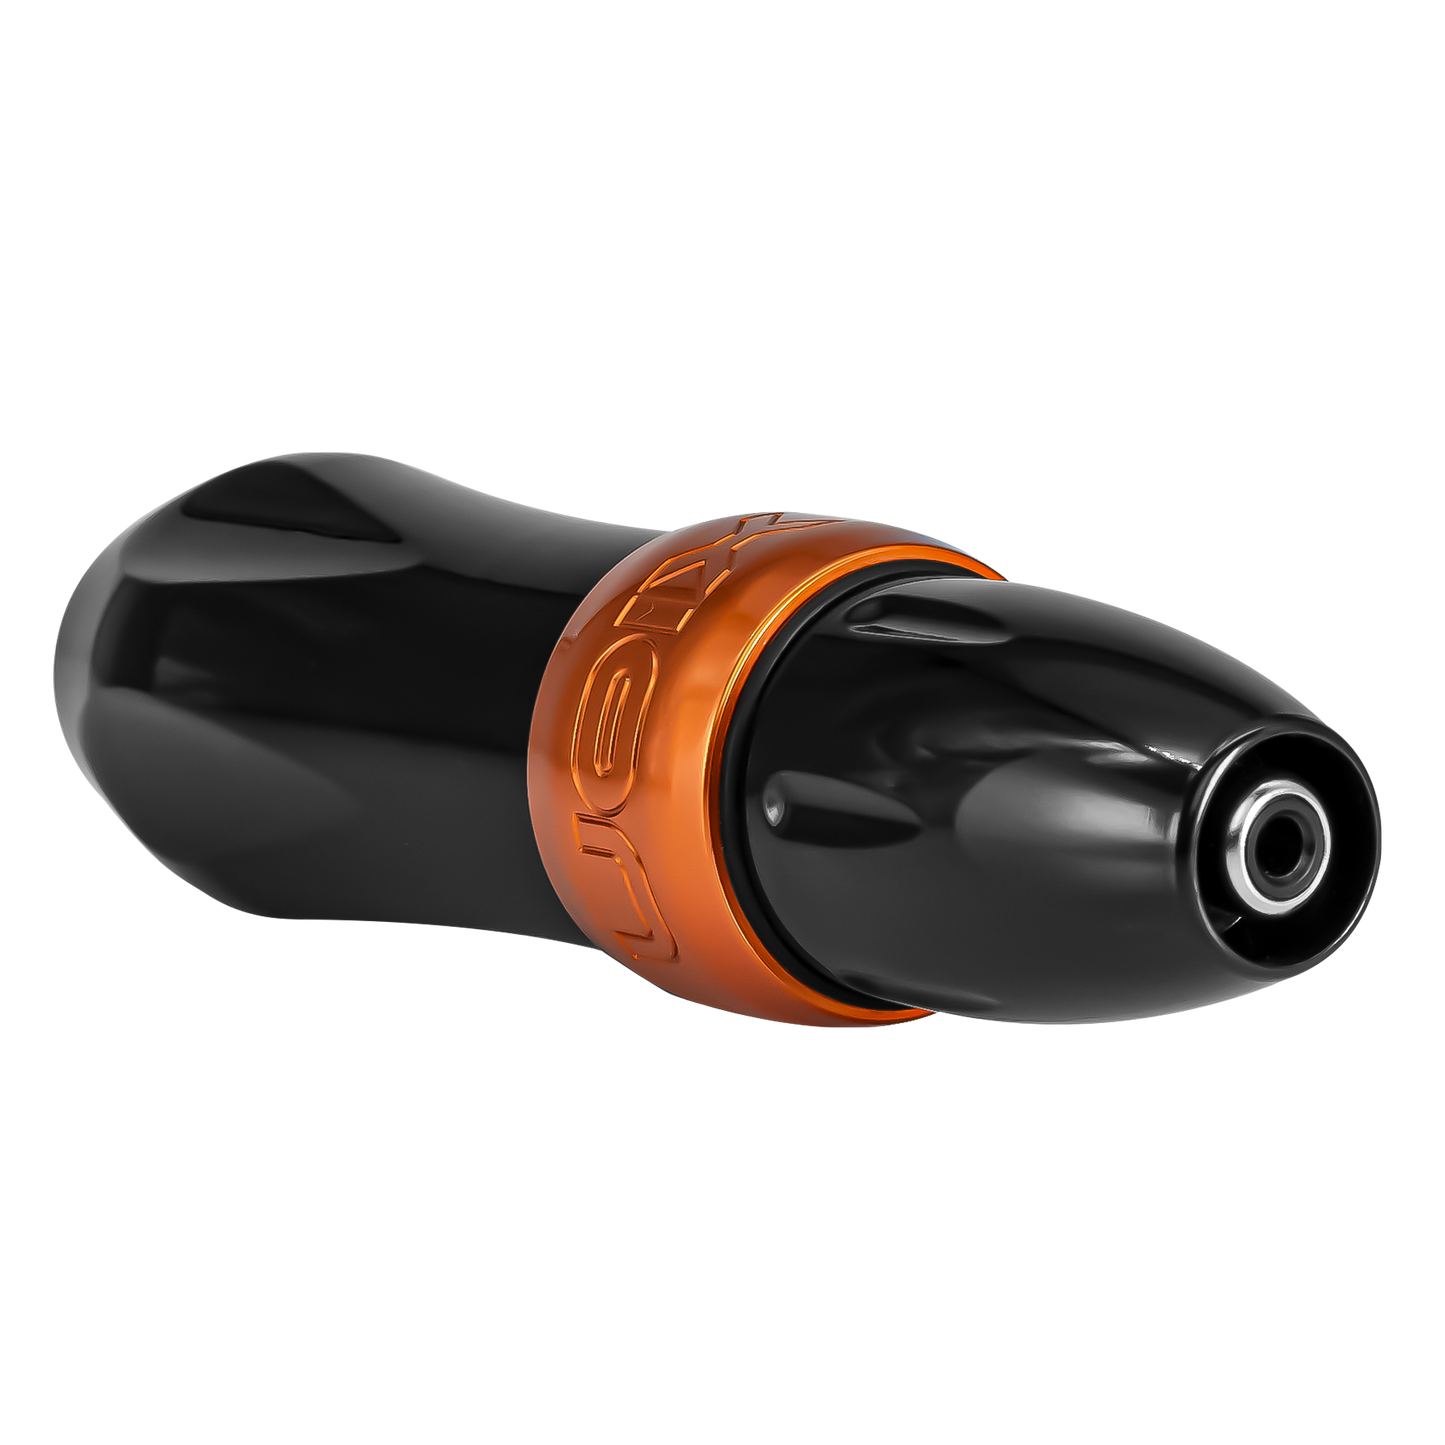 Spektra Xion in black with a tangerine band on the machine body, view from the plug